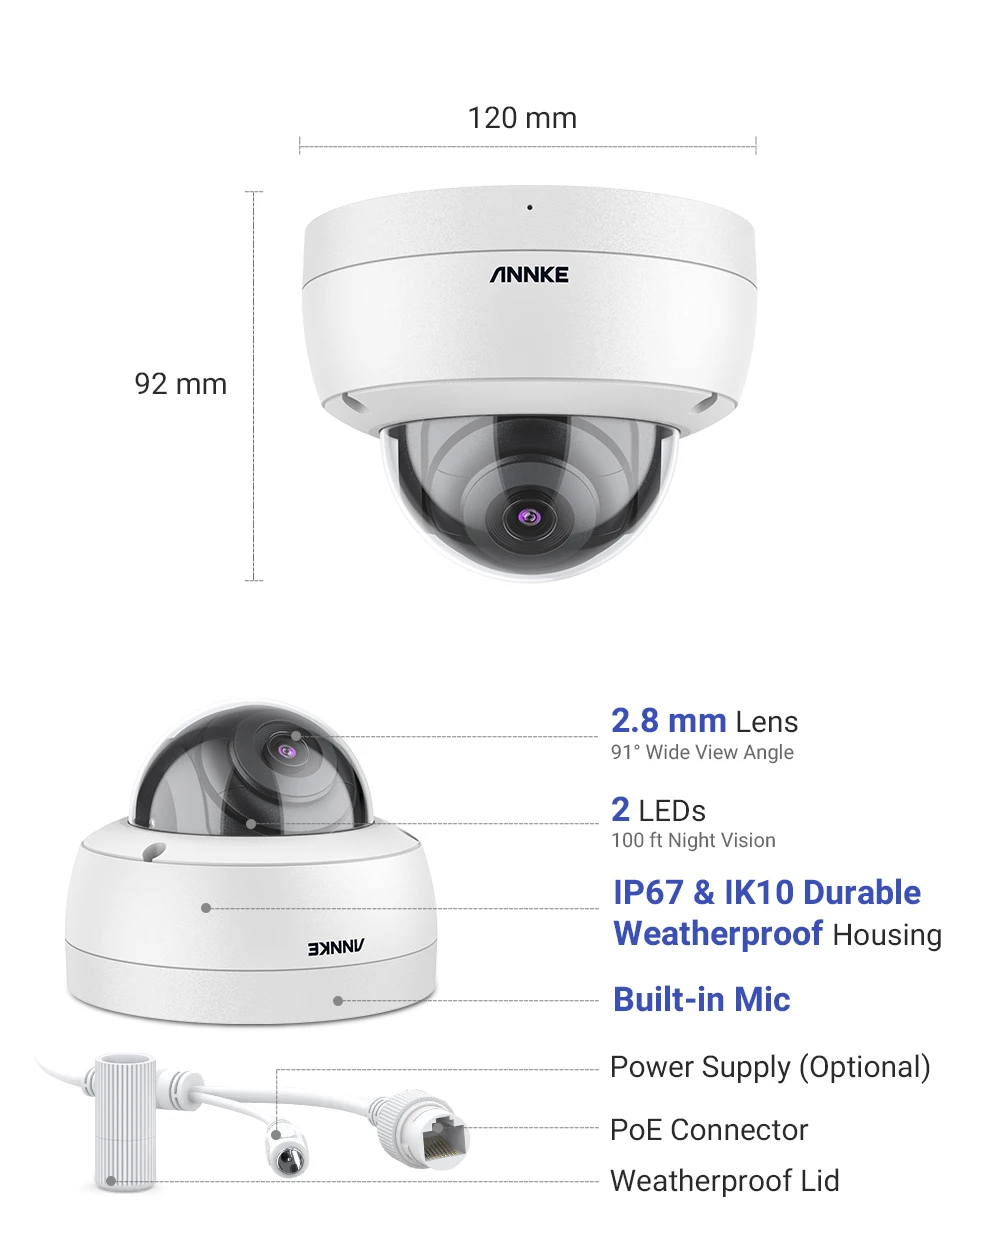 ANNKE 4PCS C500 Dome 5MP Outdoor IK10 Vandal-Proof POE Security Cameras With Audio in POE Surveillance Cameras TF Card Support images - 6